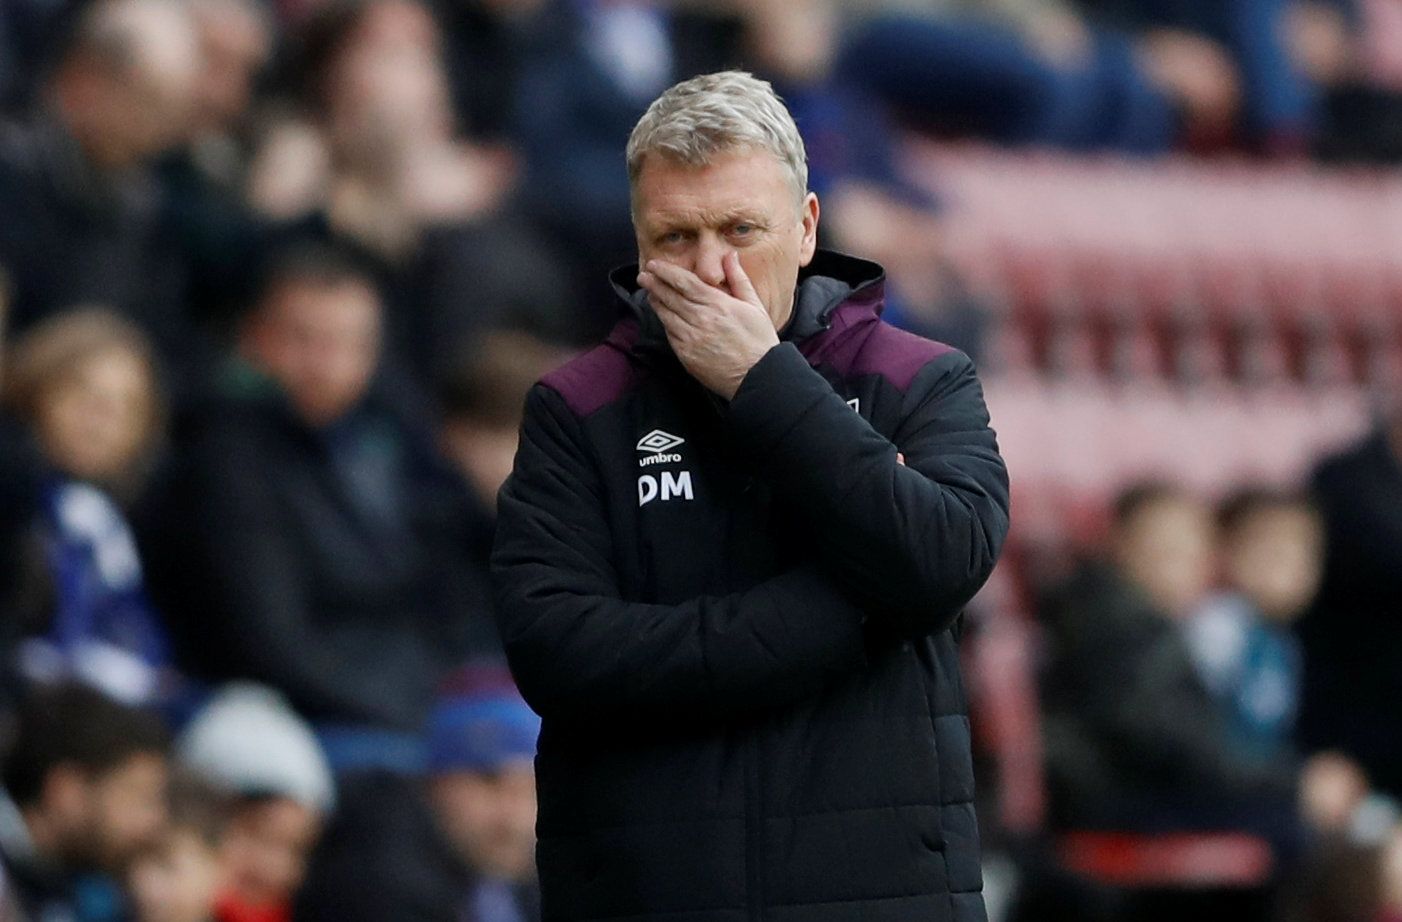 Soccer Football - FA Cup Fourth Round - Wigan Athletic vs West Ham United - DW Stadium, Wigan, Britain - January 27, 2018   West Ham United manager David Moyes          Action Images via Reuters/Carl Recine